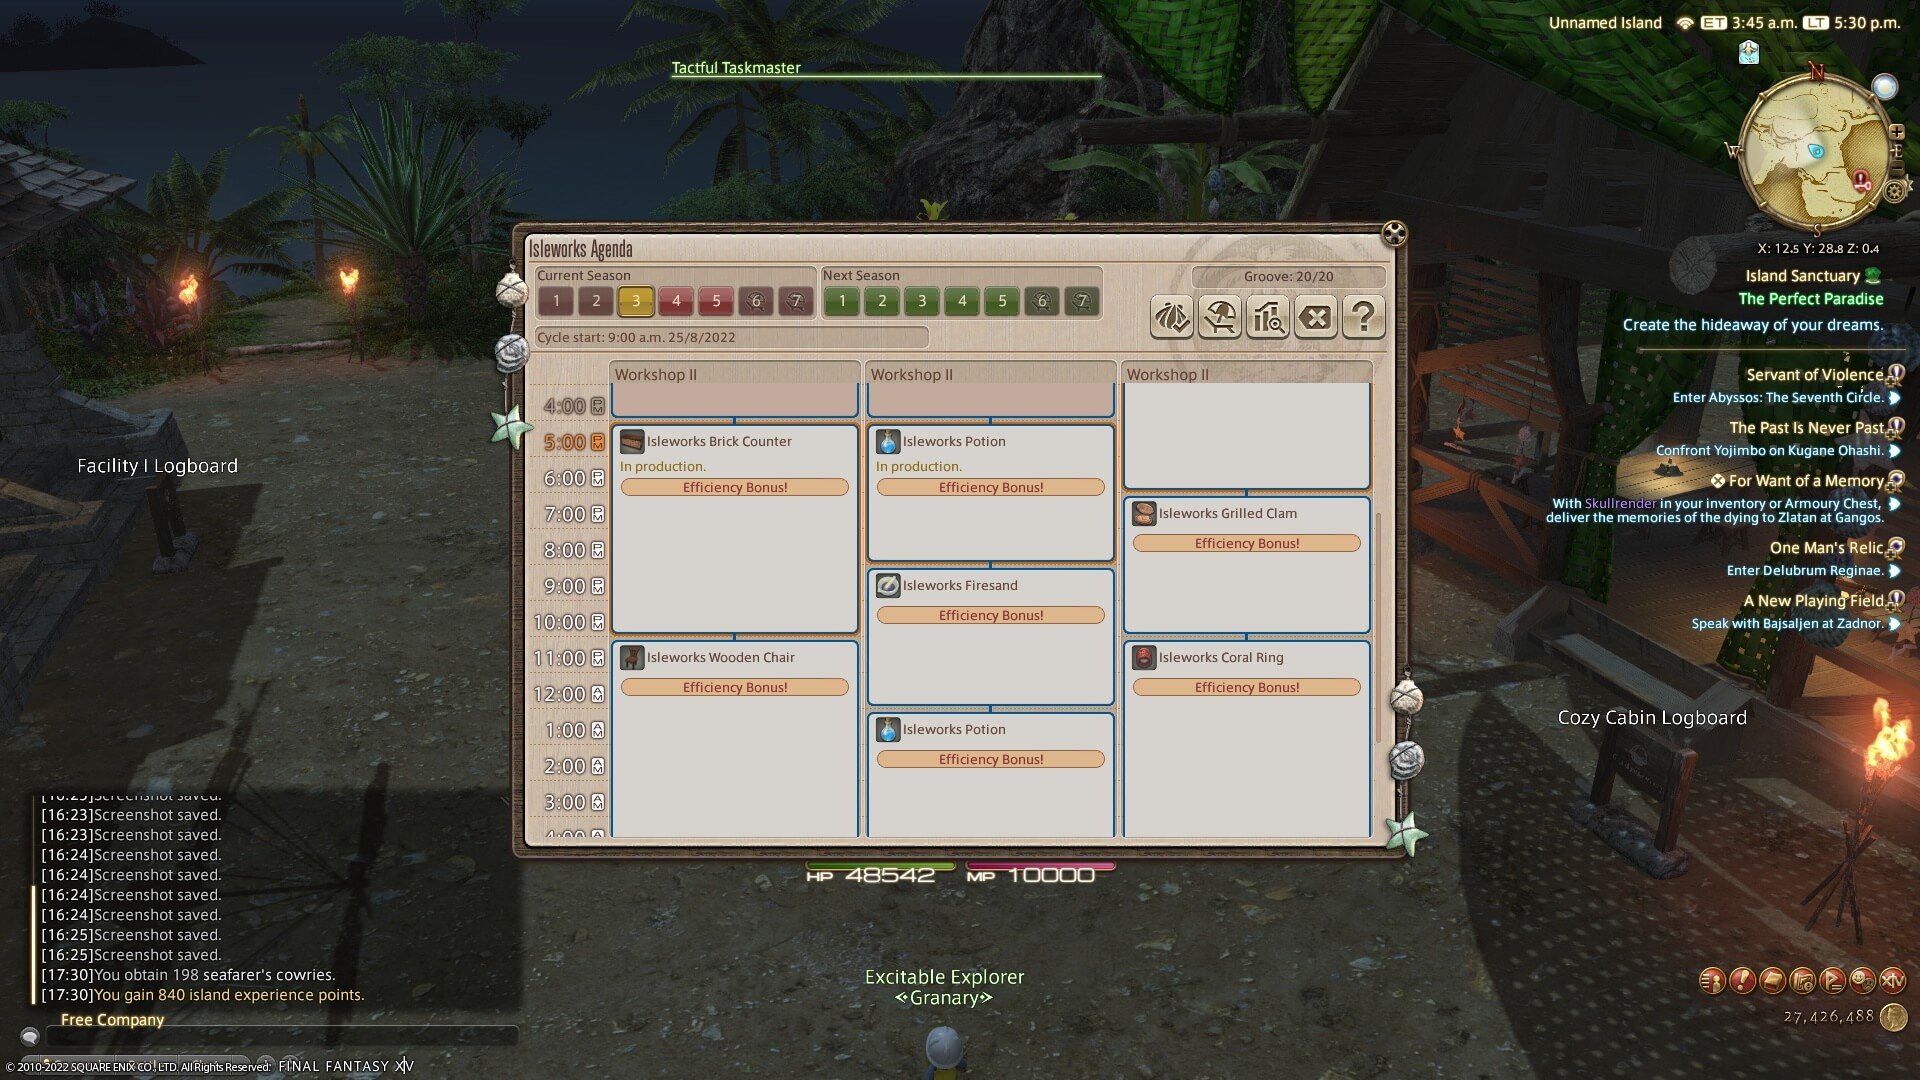 The Island Sanctuary Workshop's Isleworks Agenda menu showing a full list of items being crafted.